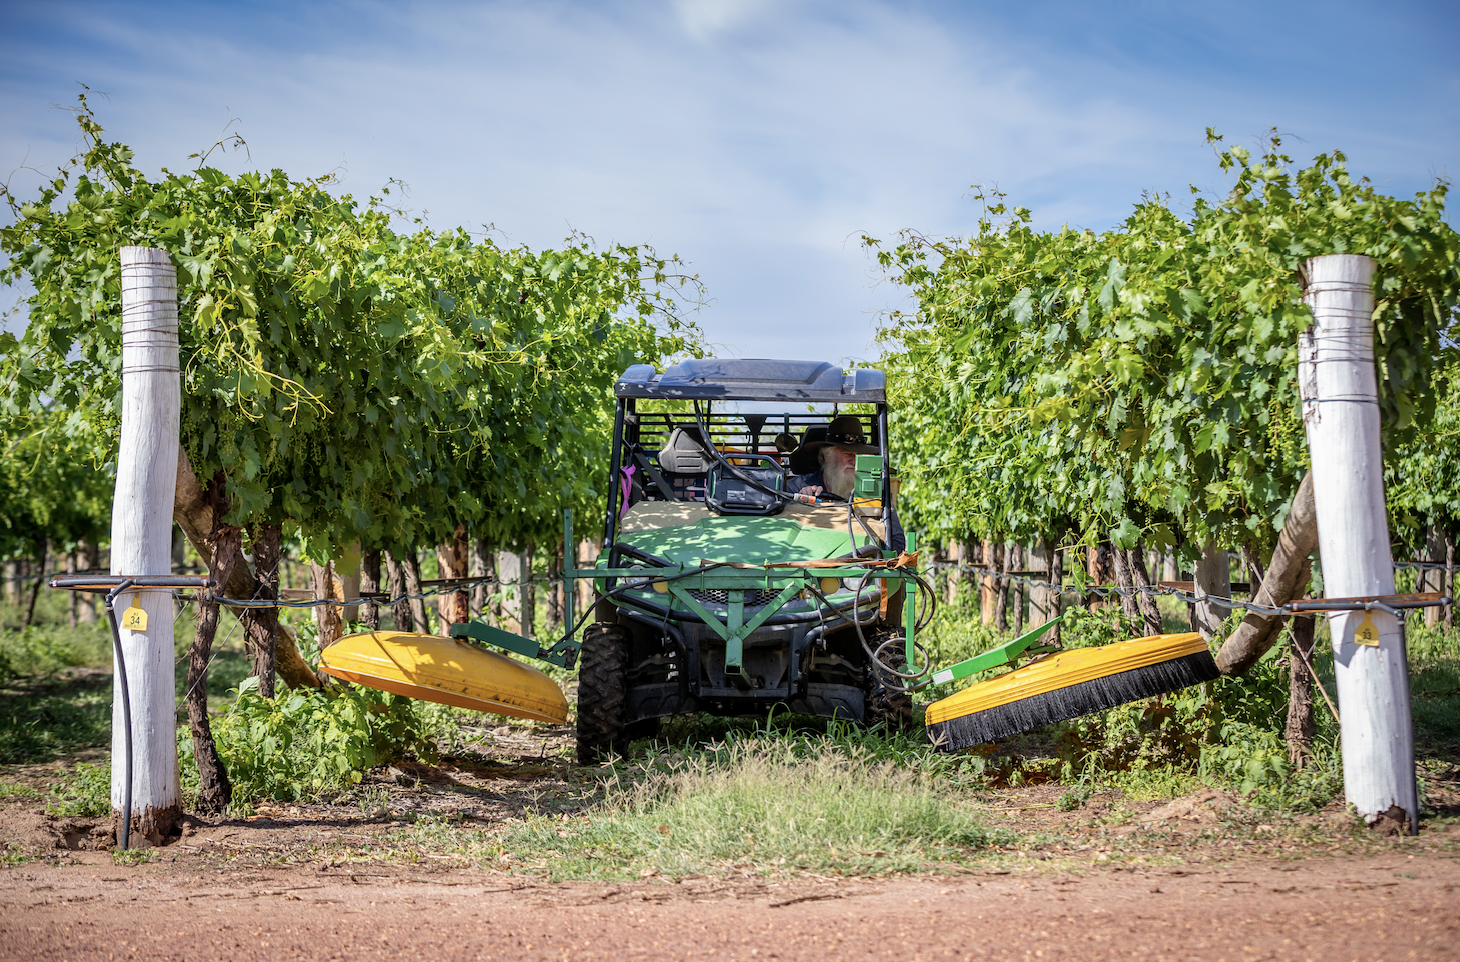 Though grapes are not Balonne Shire Queensland's most significant agricultural output, viticulture does occur in the region